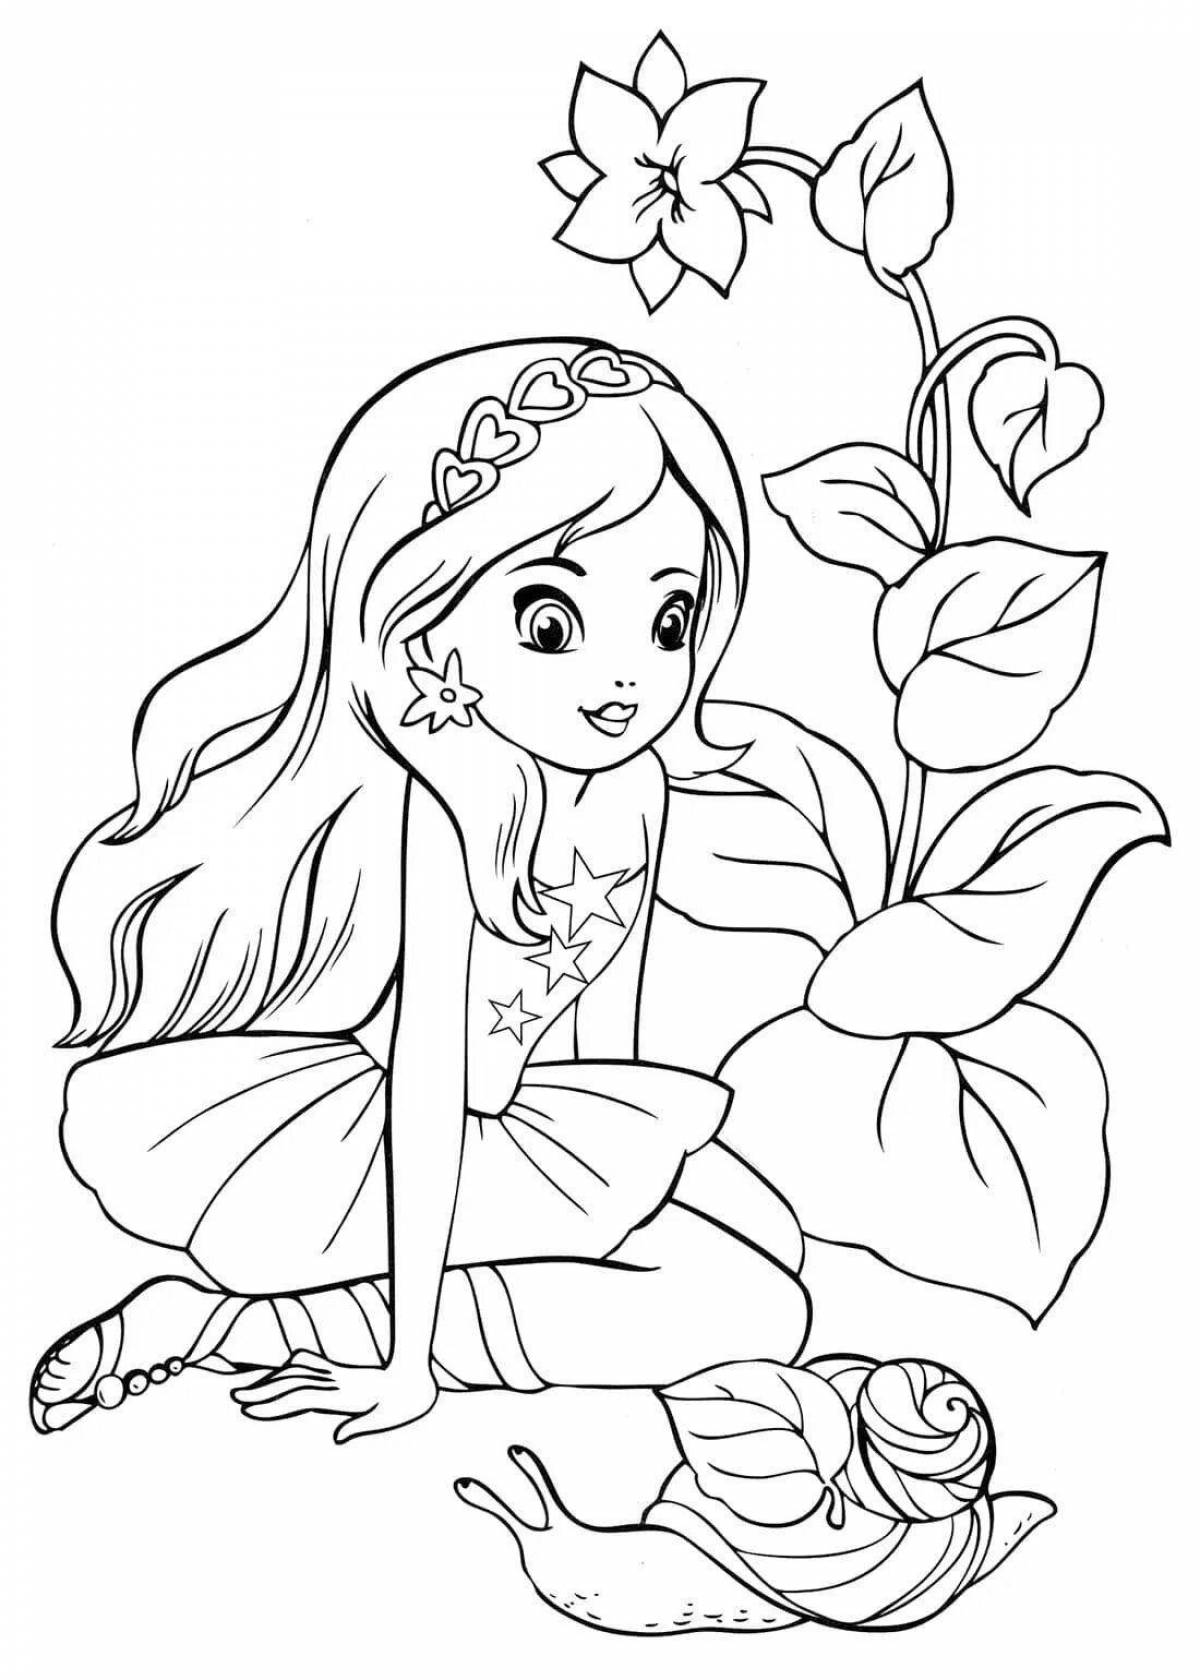 Unique coloring book for girls for kids